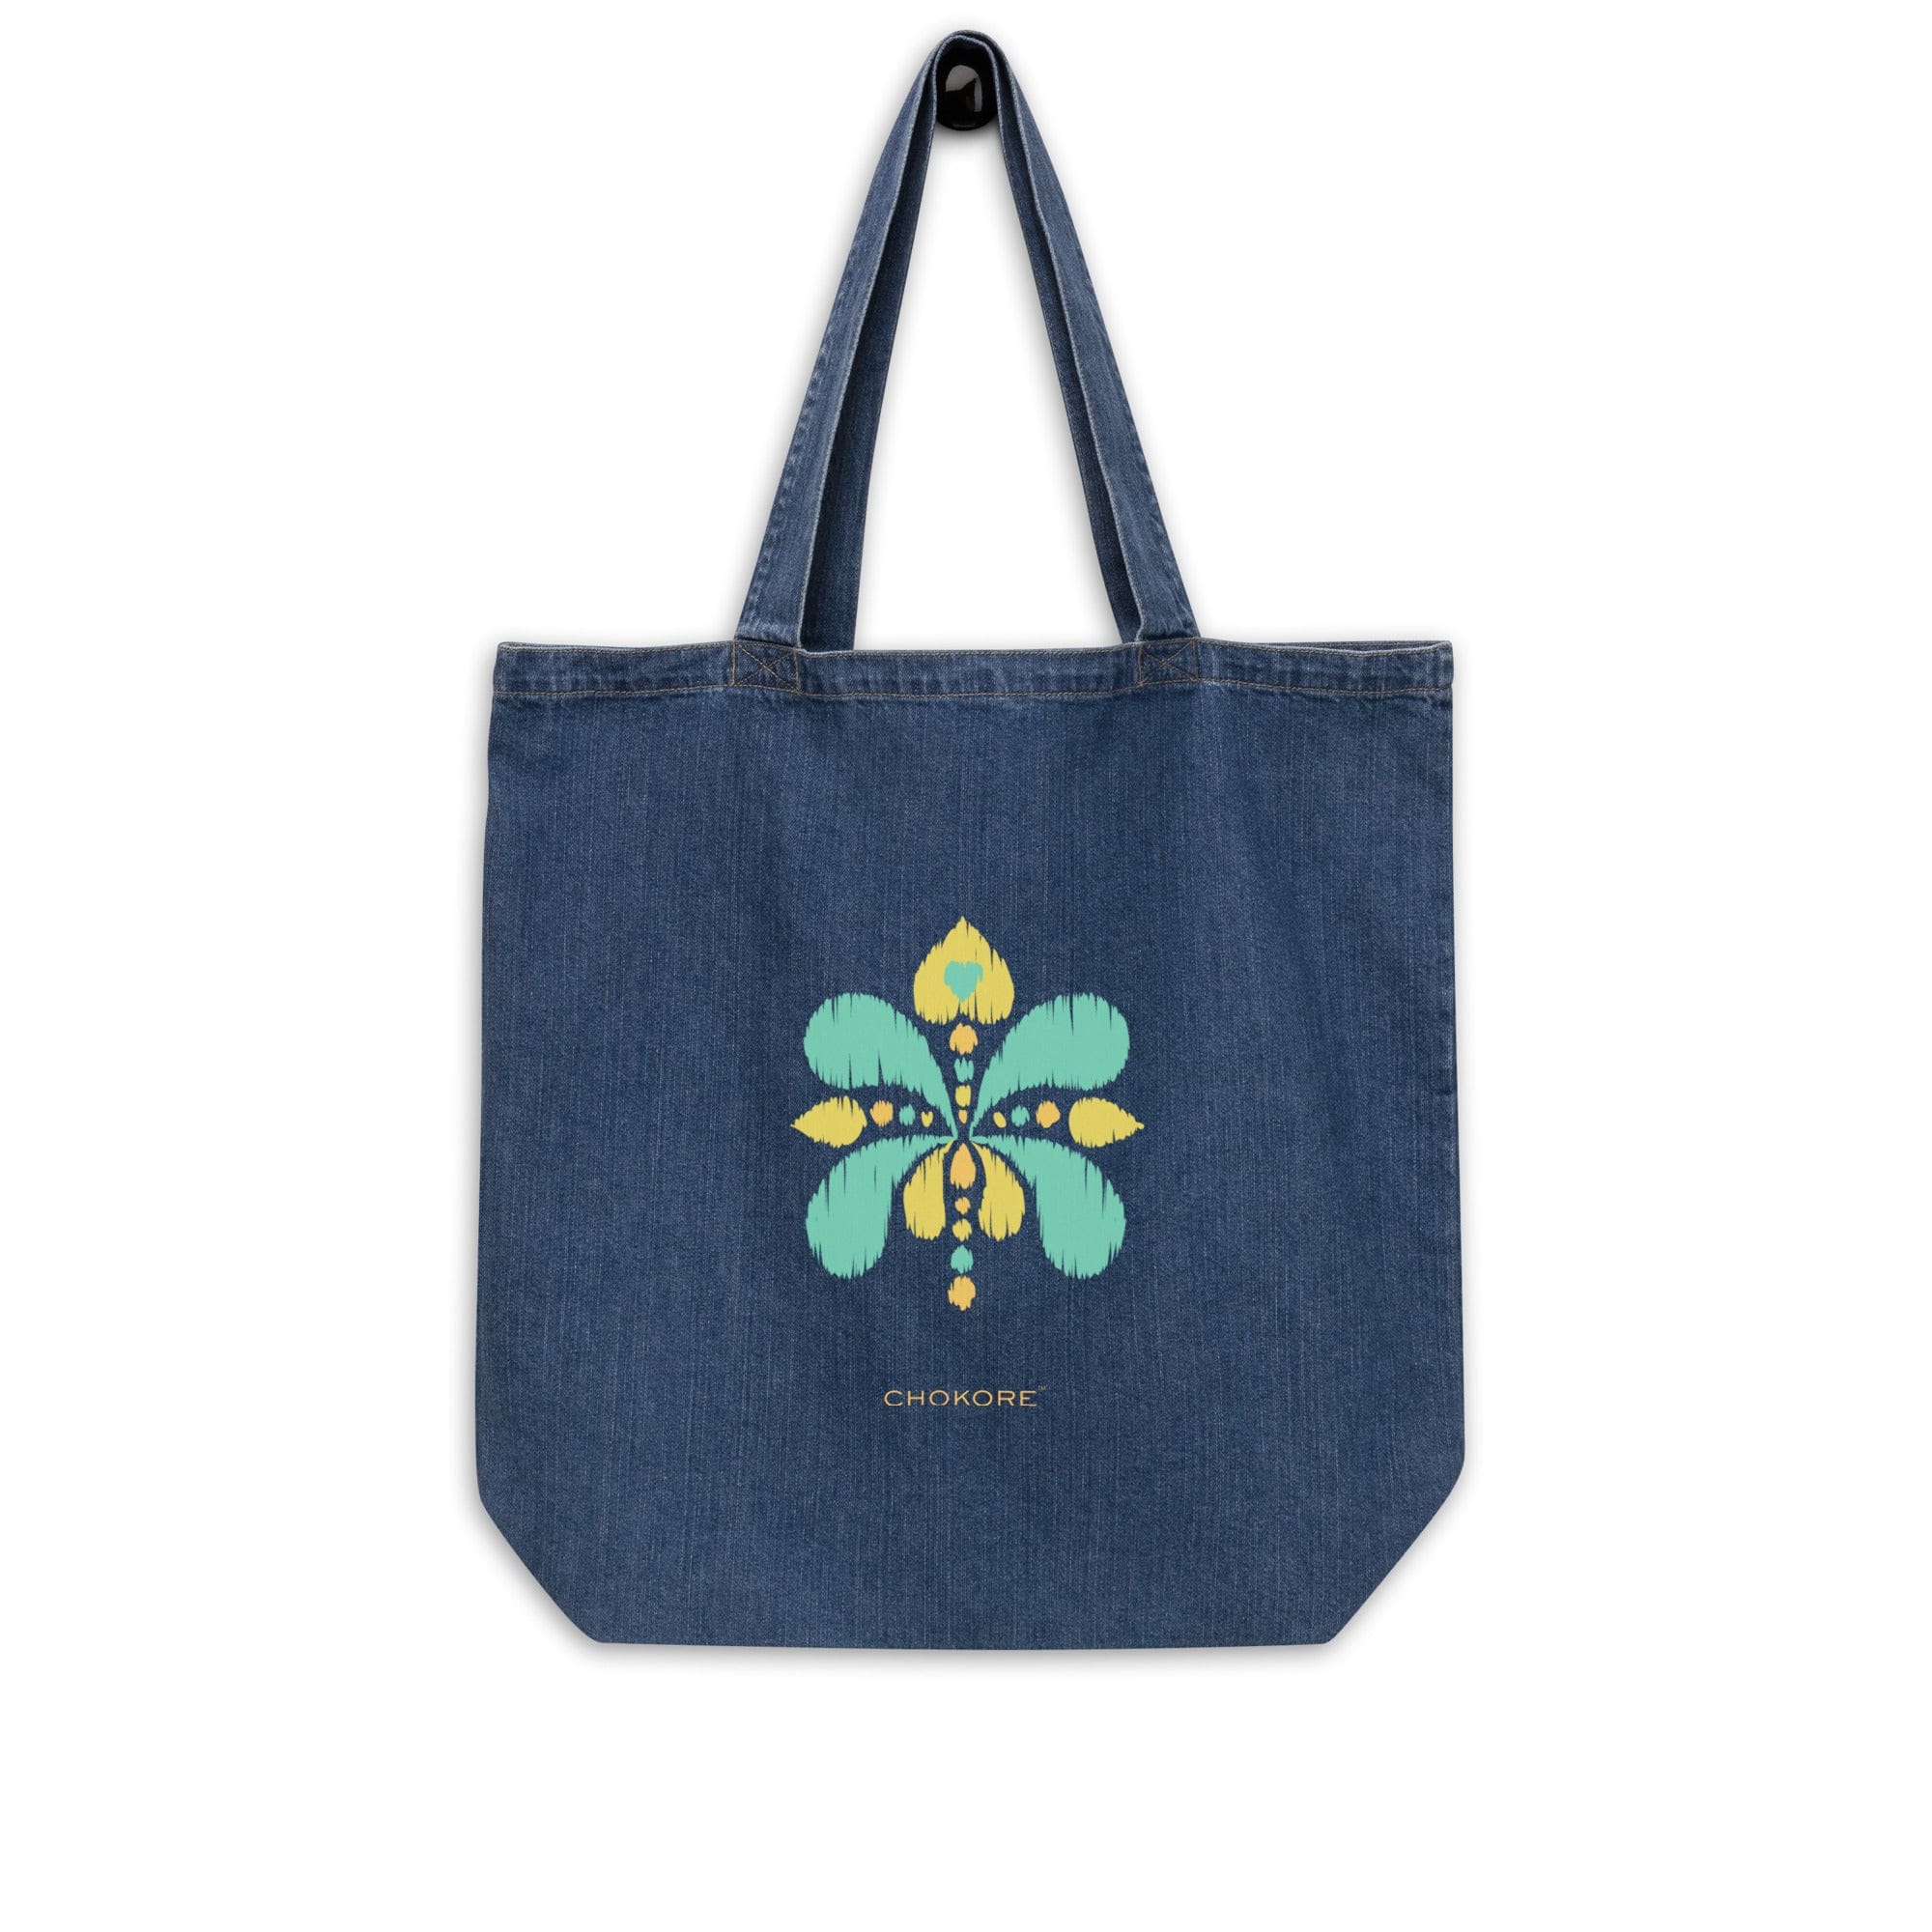 Organic Denim Tote Bag with a Shades of Green Motif. From the Indian at Heart collection